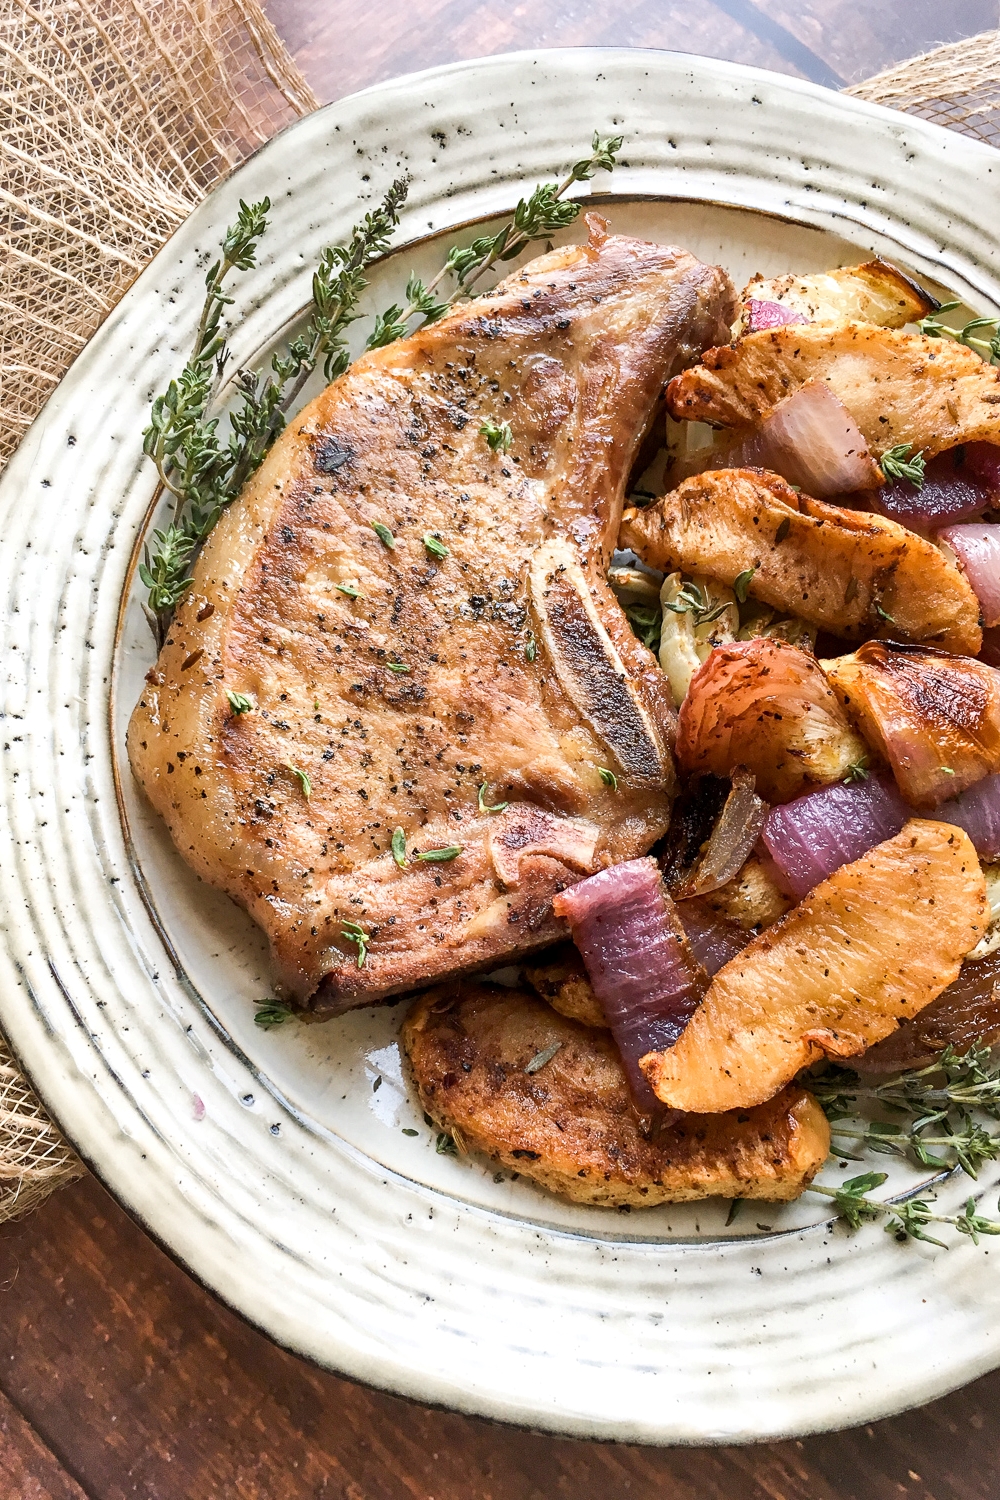 This is a great sous vide pork chops recipe that'll leave your mouth watering. It's easy to make and results in tender, juicy pork every time.